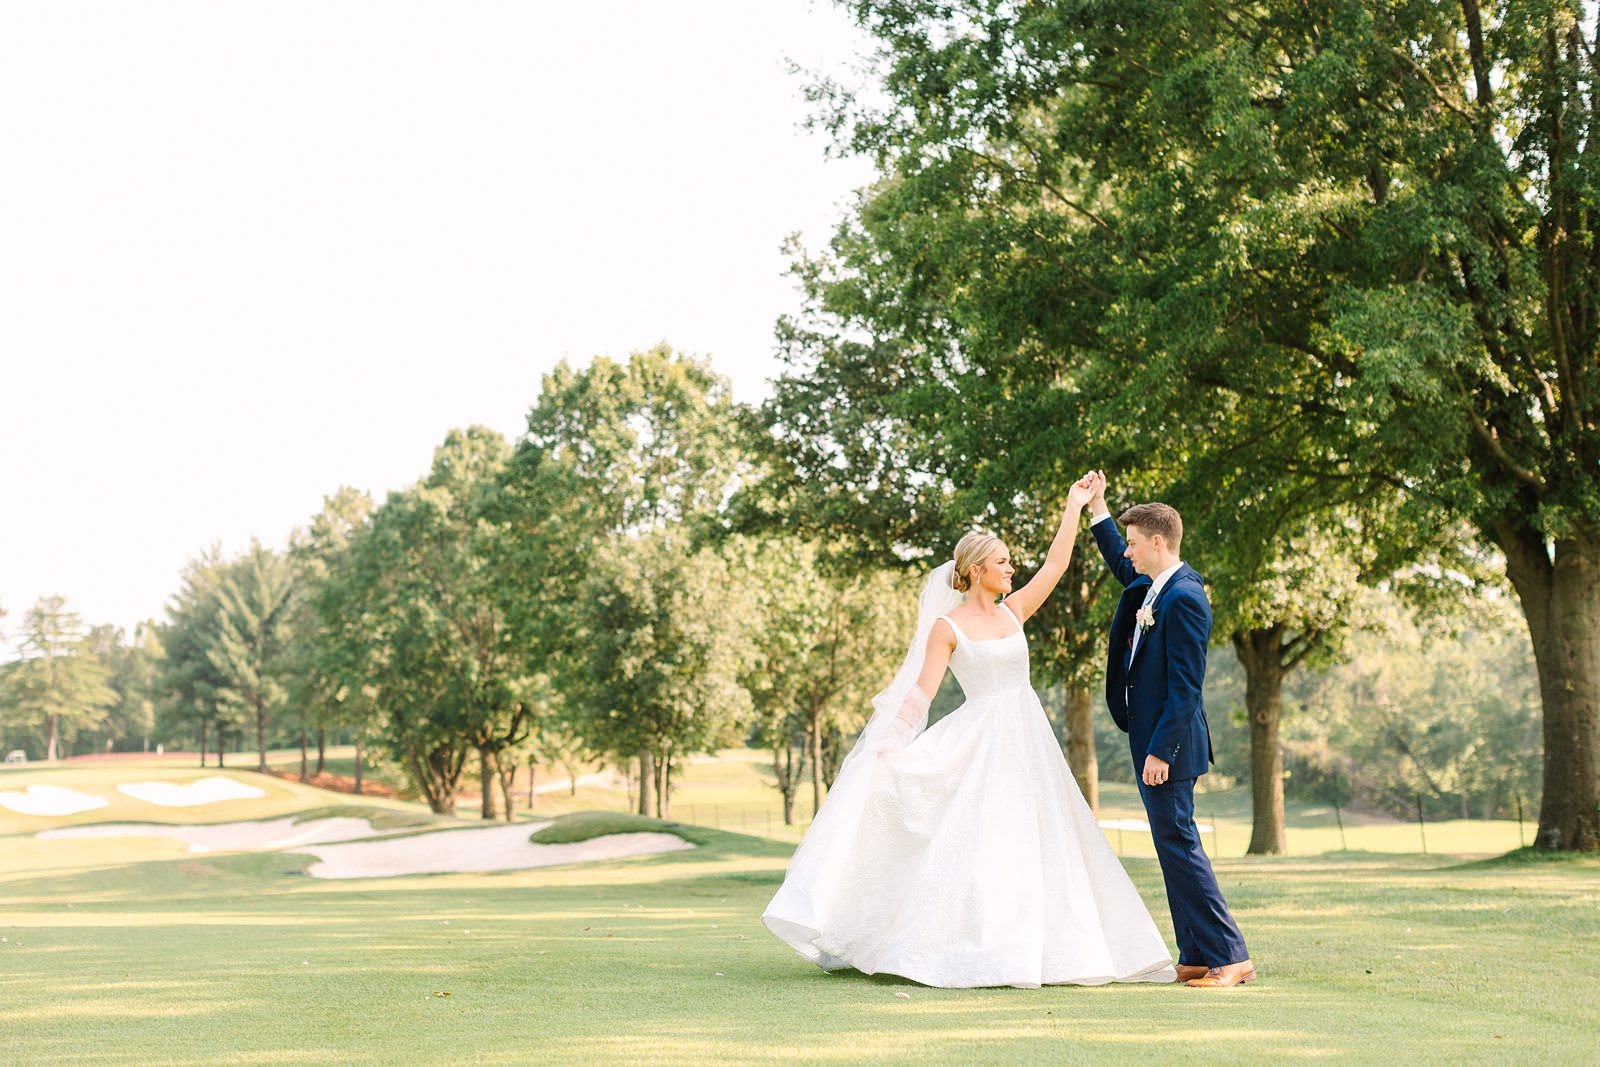 An Evansville Country Club Wedding | Ashley and Beau | Bret and Brandie Photography185.jpg